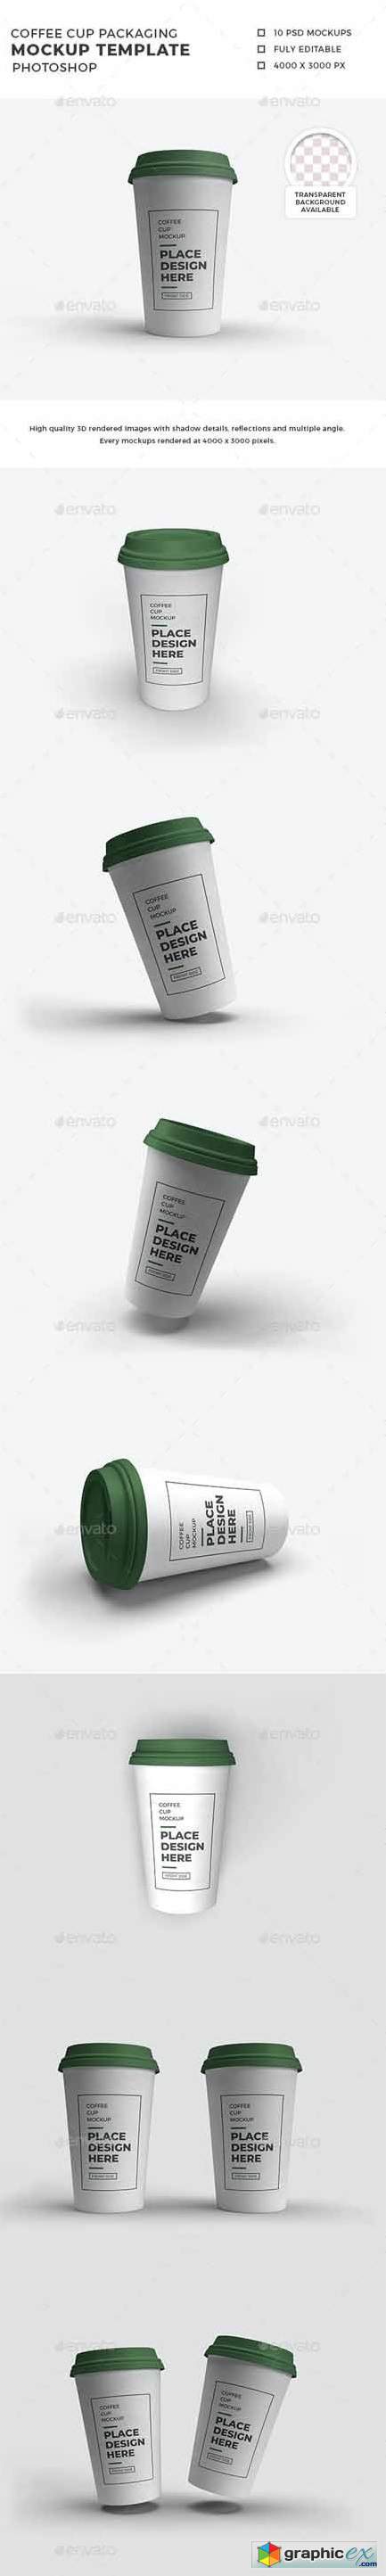 Download Coffee Cup Packaging Mockup Template Set » Free Download ...